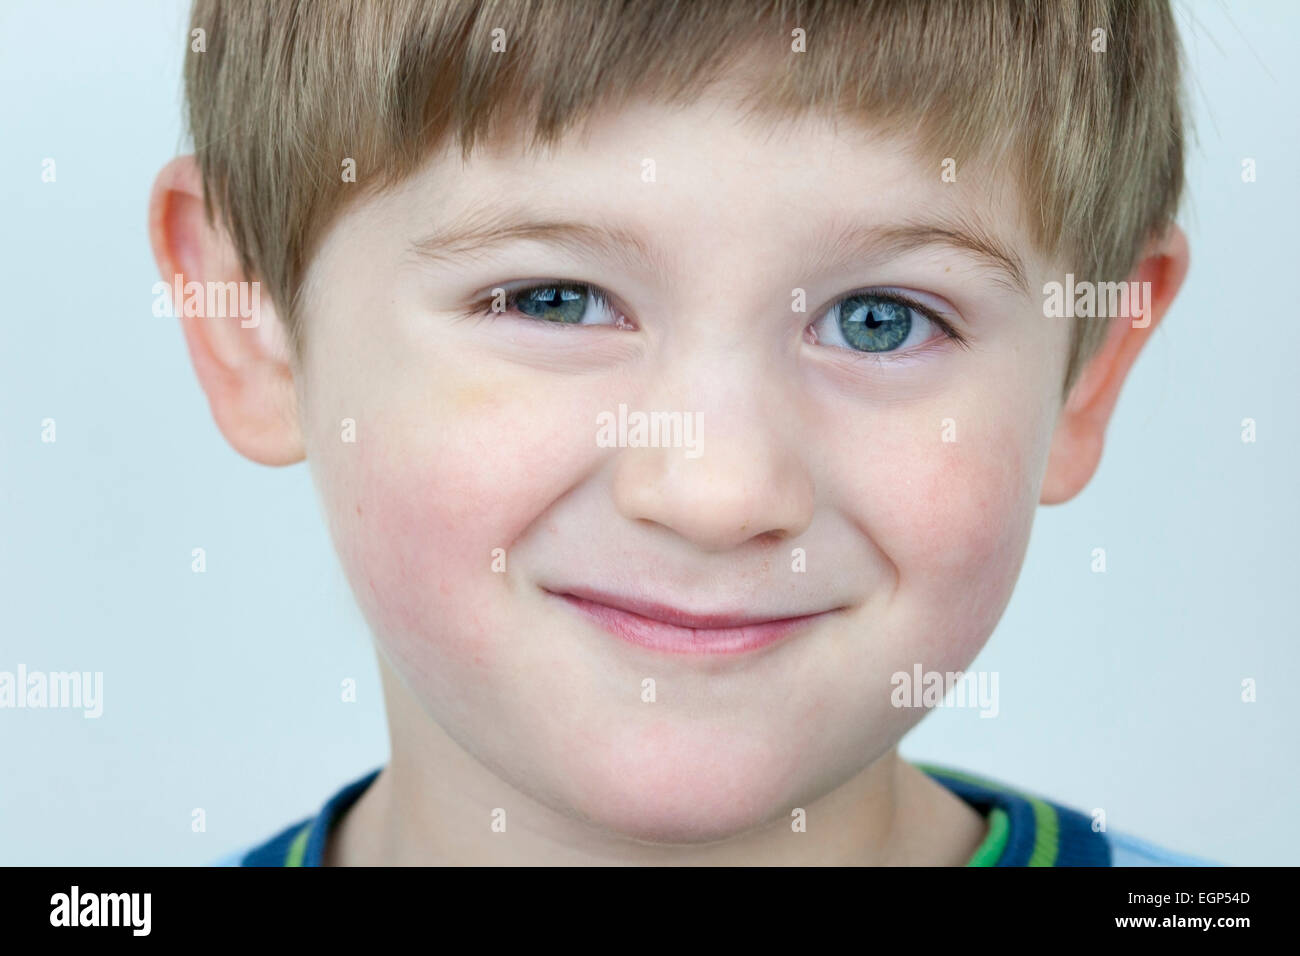 5 year old boy face shots close up unsure expression Stock Photo